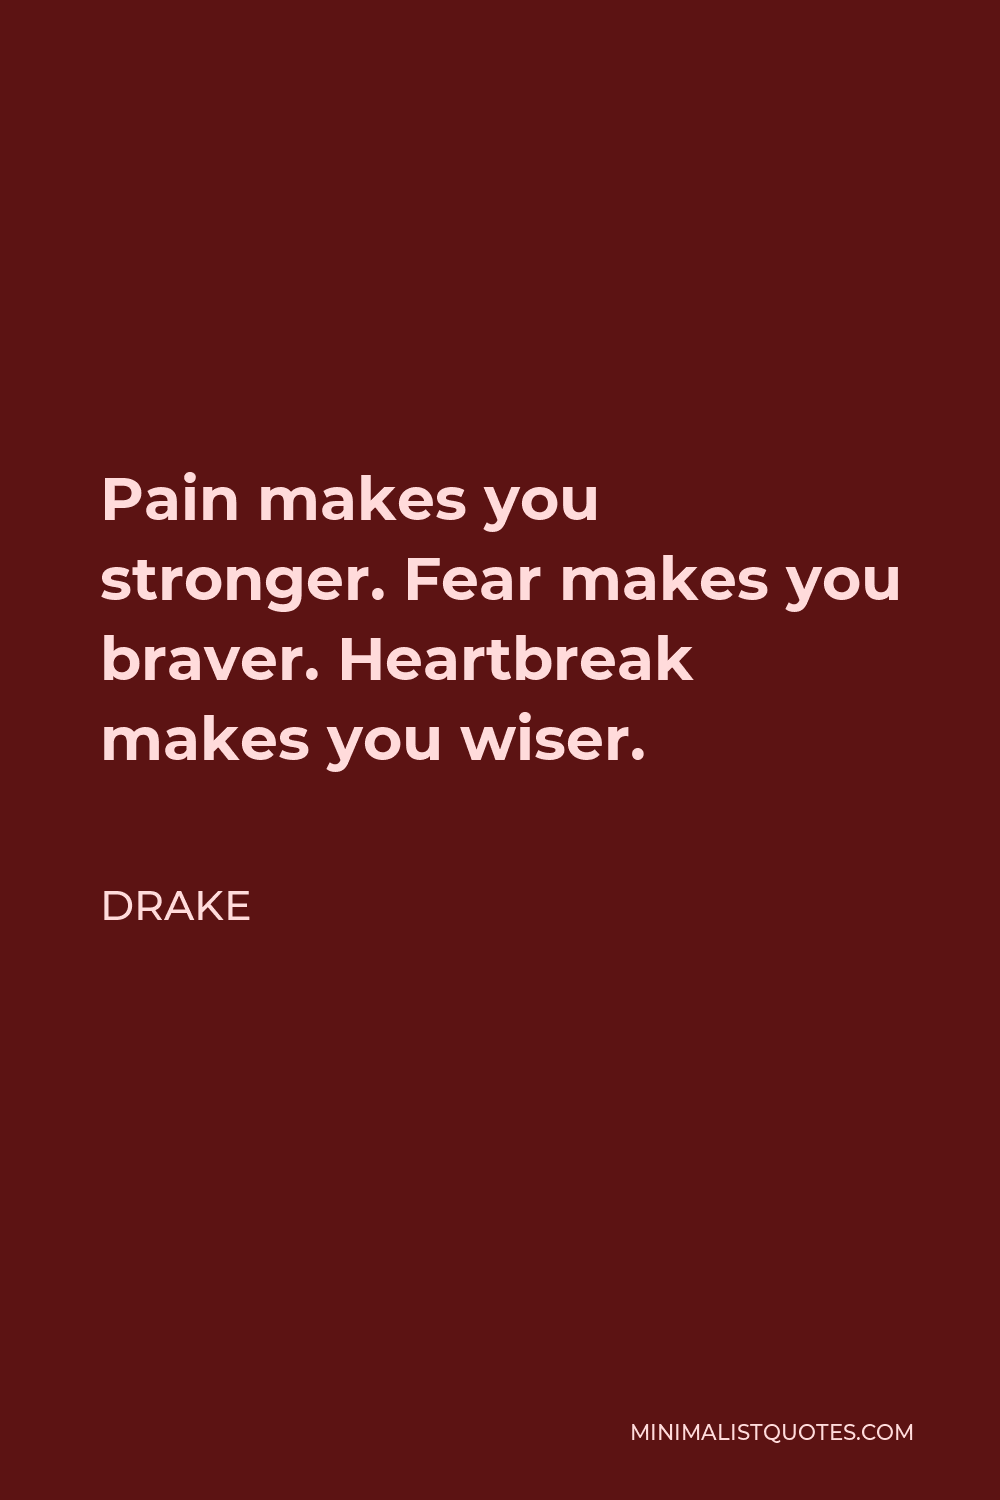 Drake Quote: Pain makes you stronger. Fear makes you braver ...